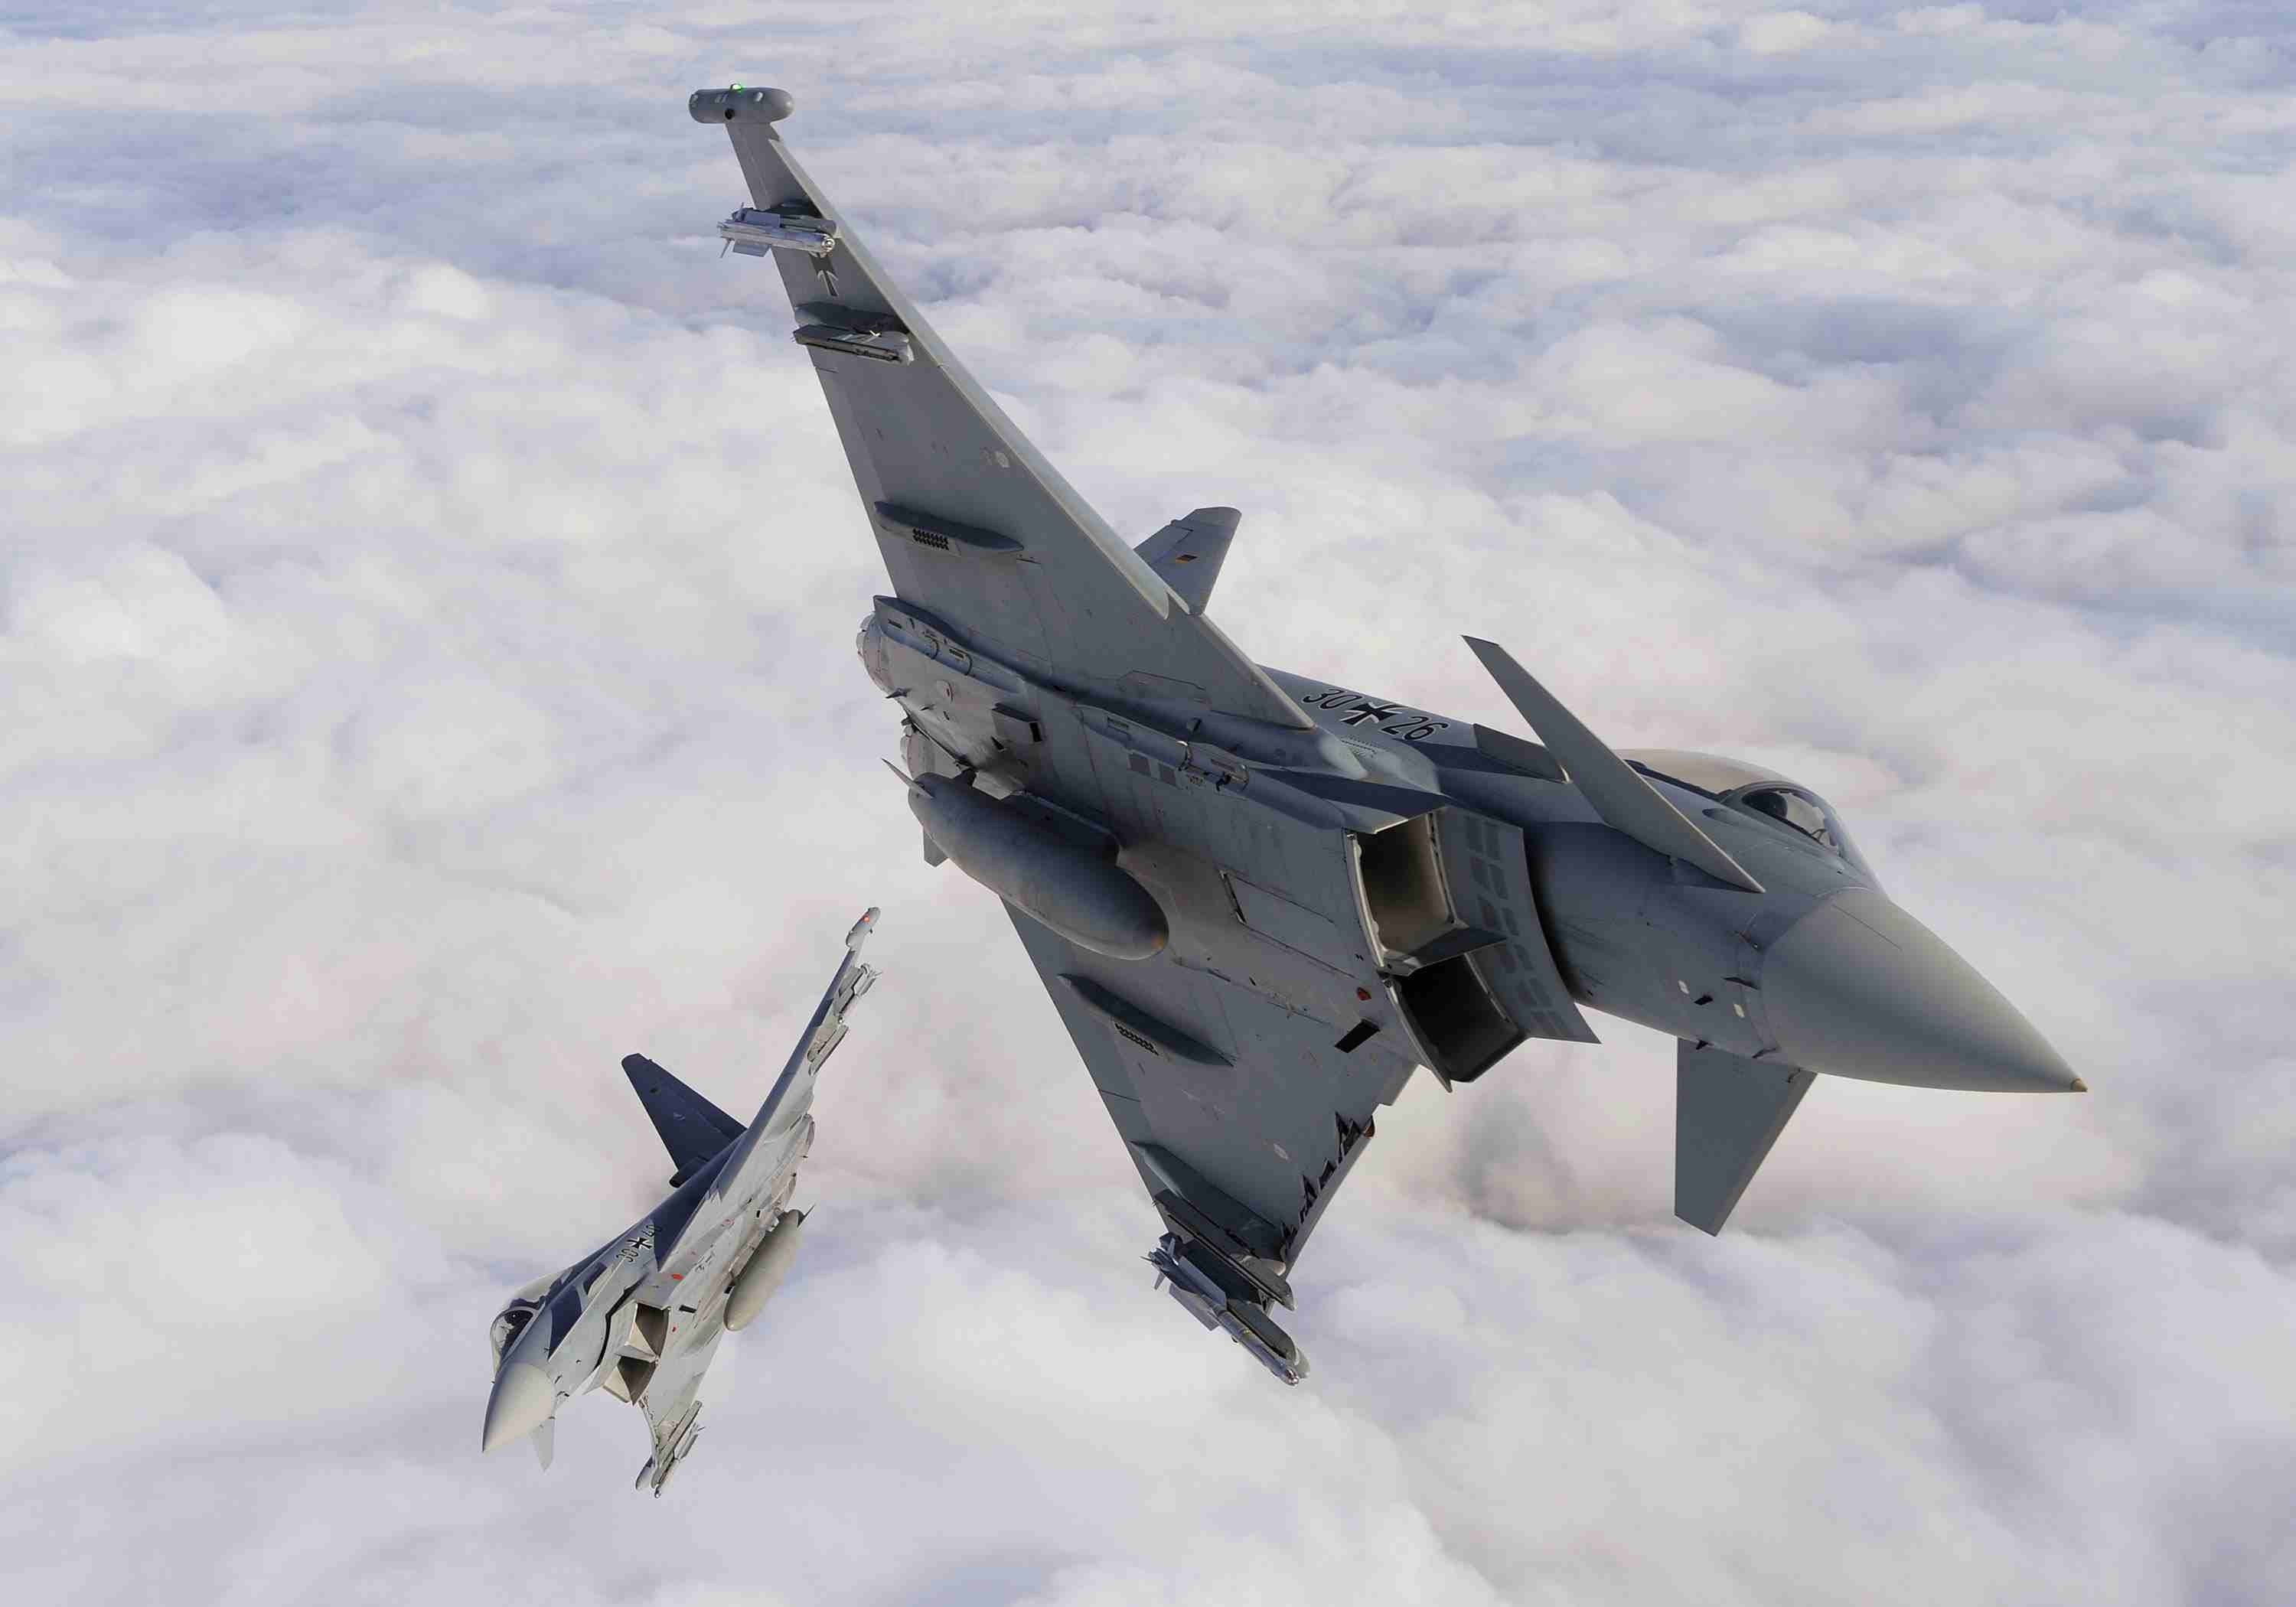 General 3000x2100 Eurofighter Typhoon jet fighter airplane aircraft sky military aircraft vehicle military Luftwaffe